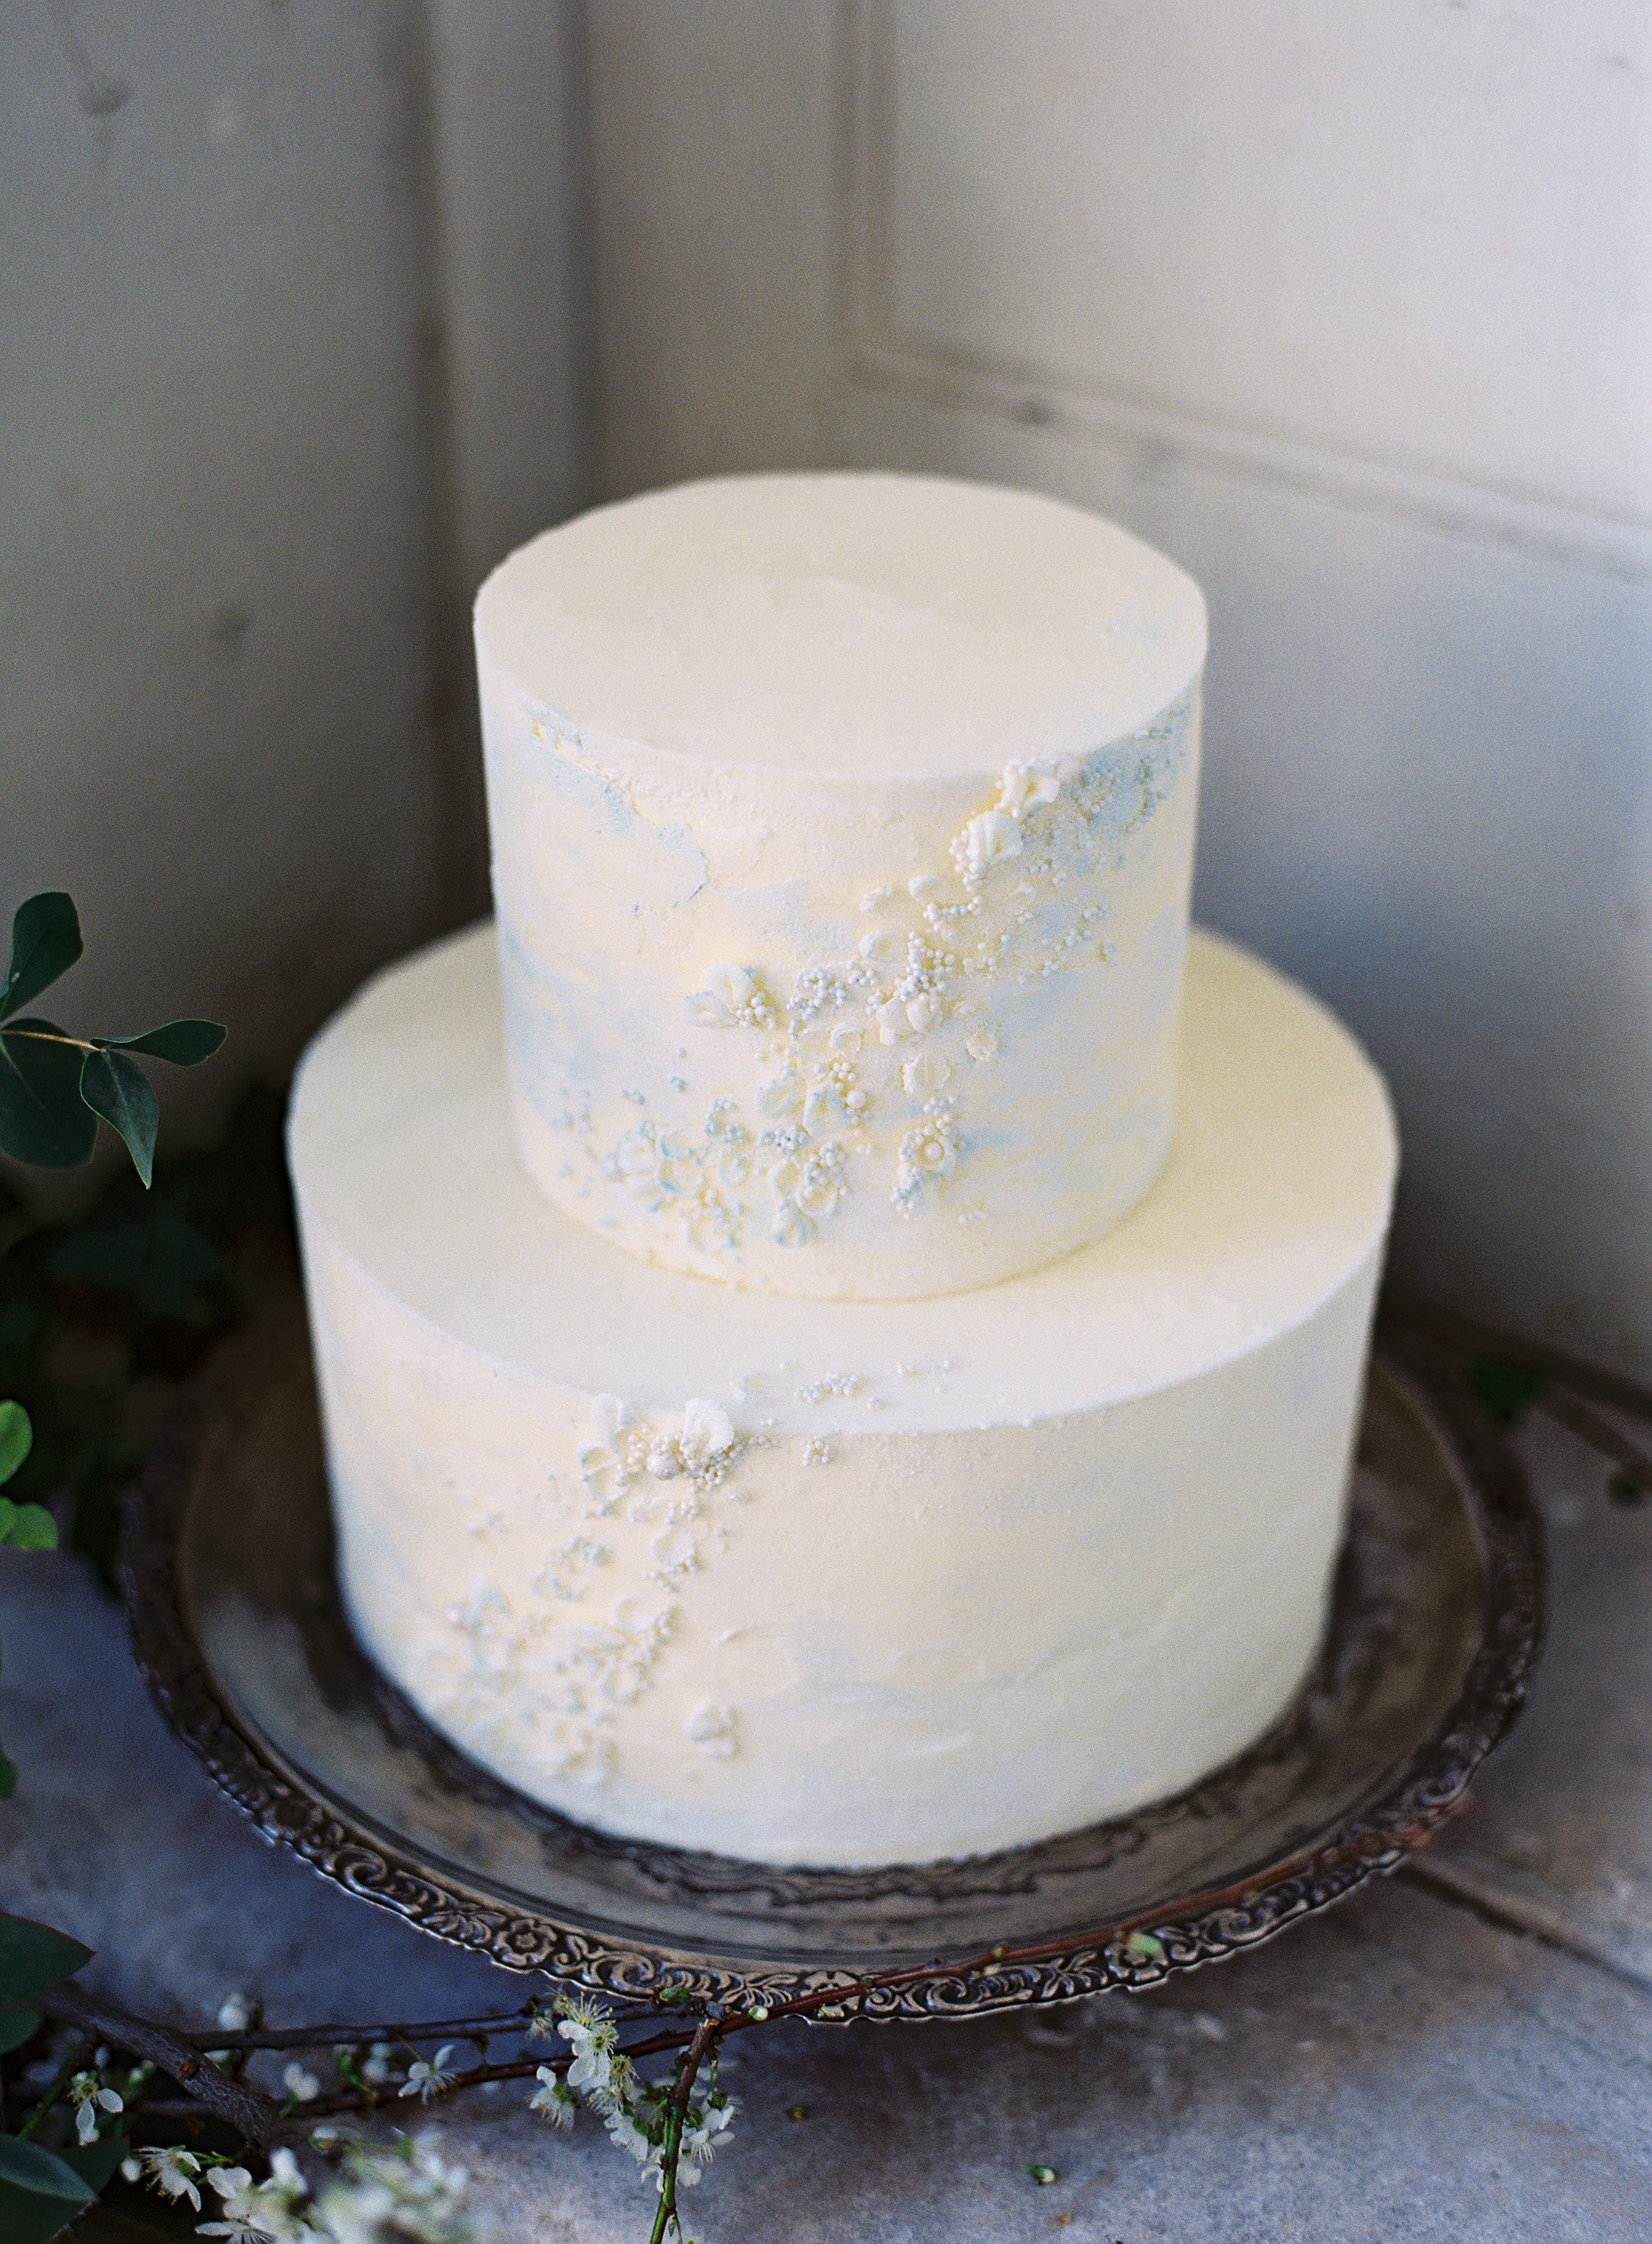 Butterceam cake with romantic textural details for a Spring wedding inspiration shoot at Somerley House. Photo by Camilla Arnhold